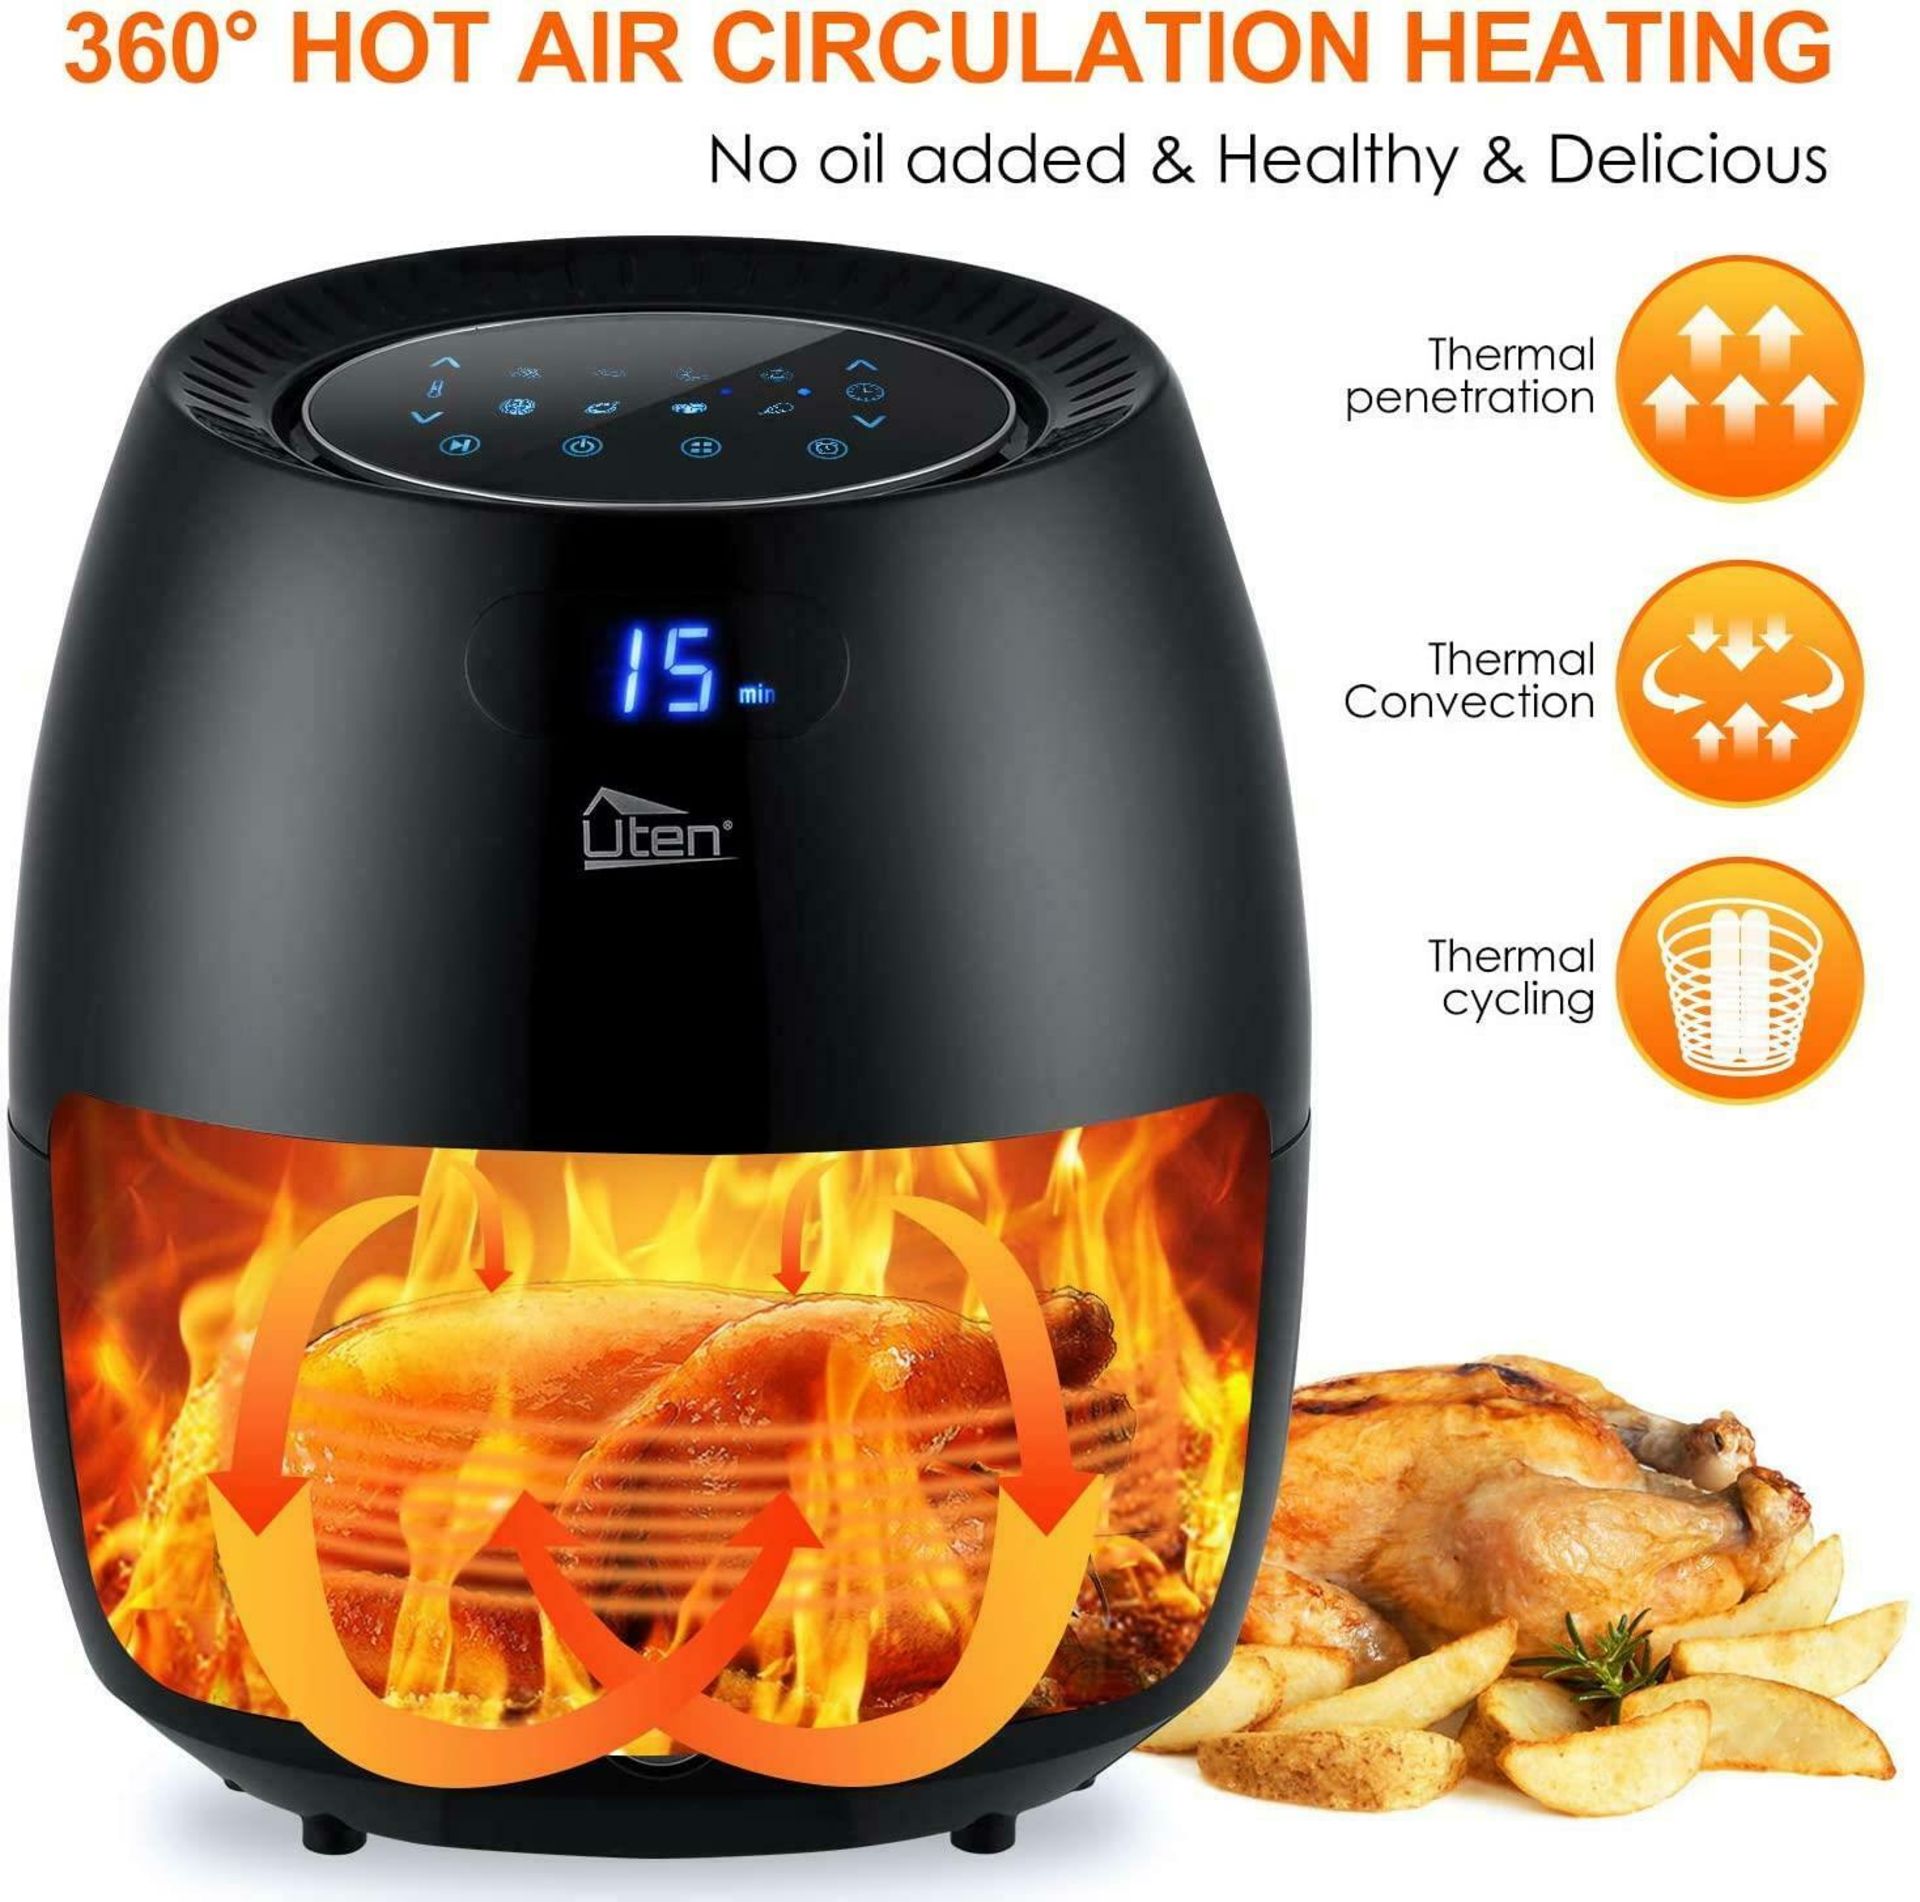 Uten air fryer 6.5l electric oven oilless cooker temp/time control touchscreen rrp £99.99 - Image 5 of 5